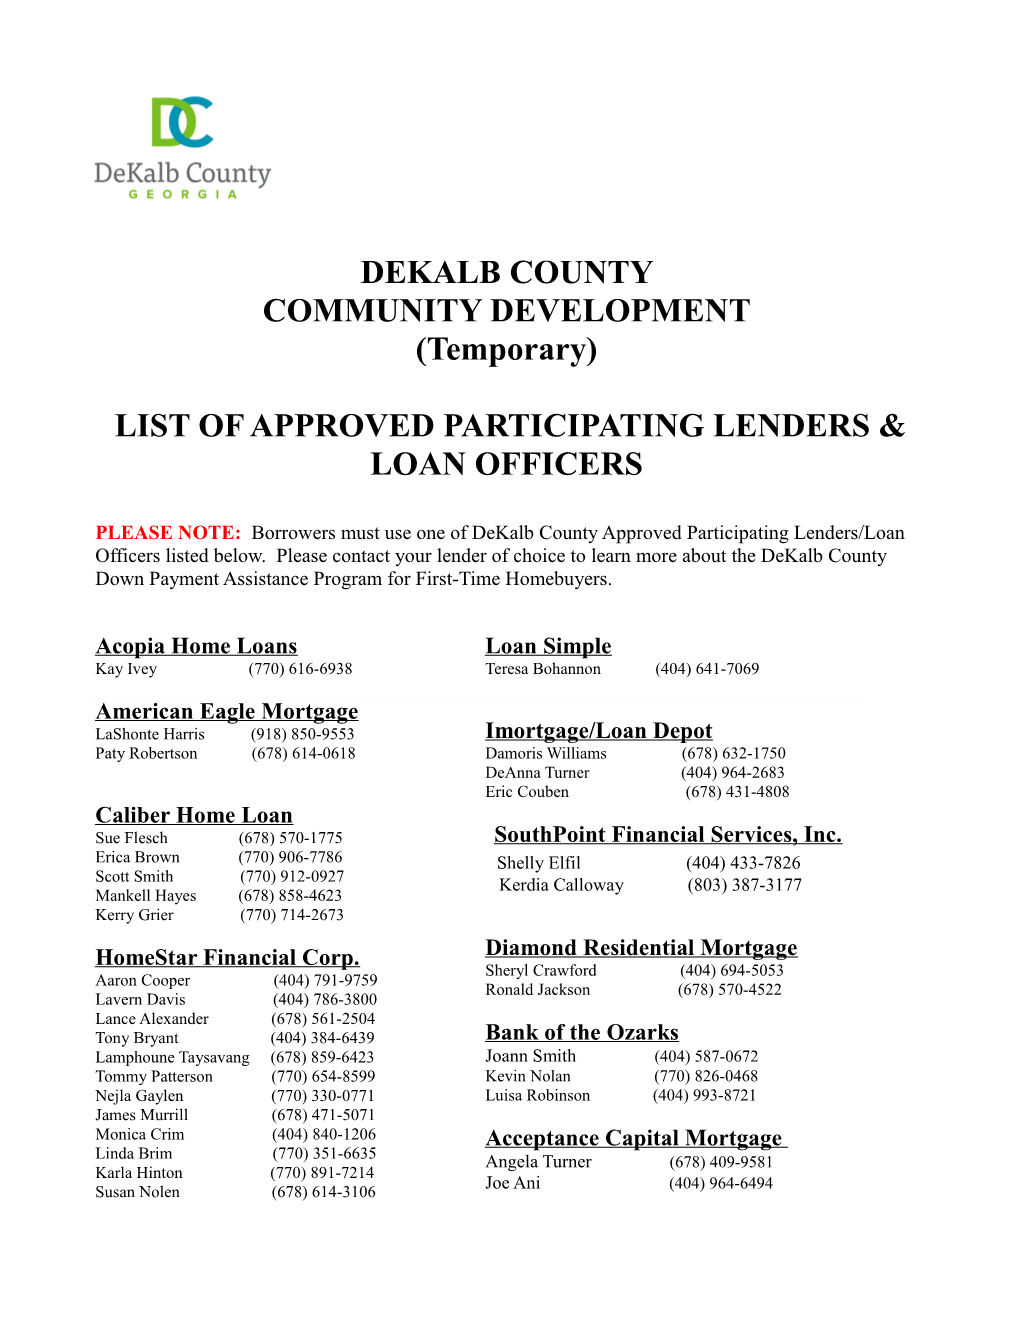 List of Approved Participating Lenders & Loan Officers